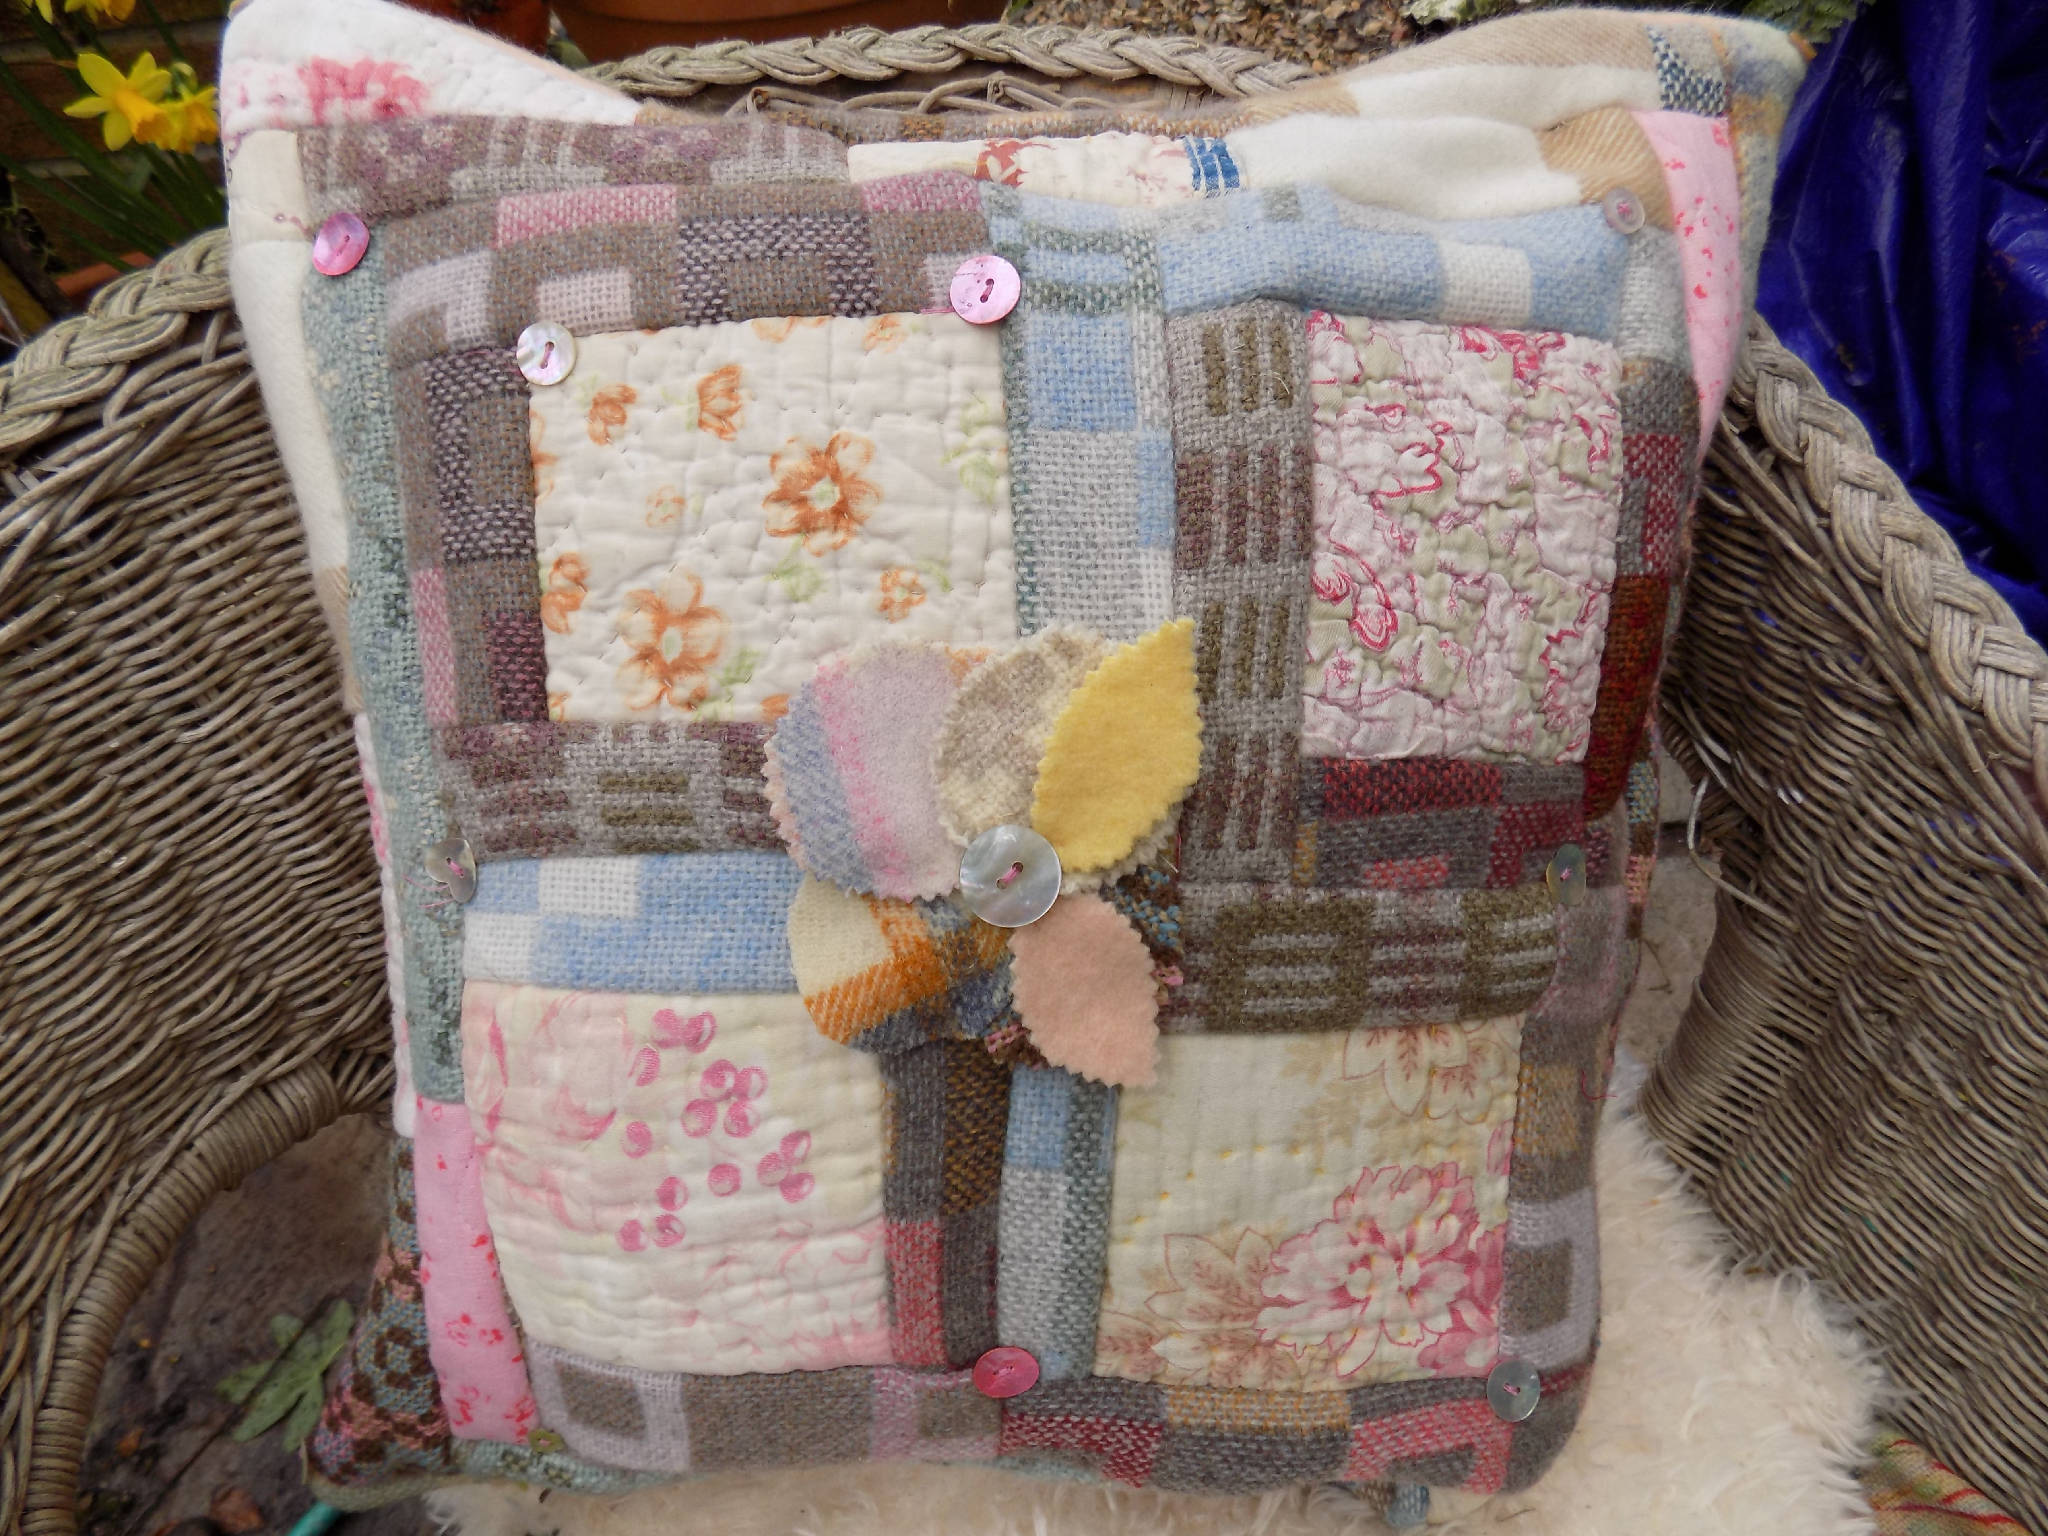 Wonky Welsh Cushions created from reclaimed Welsh wool fabrics and vintage Quilts.